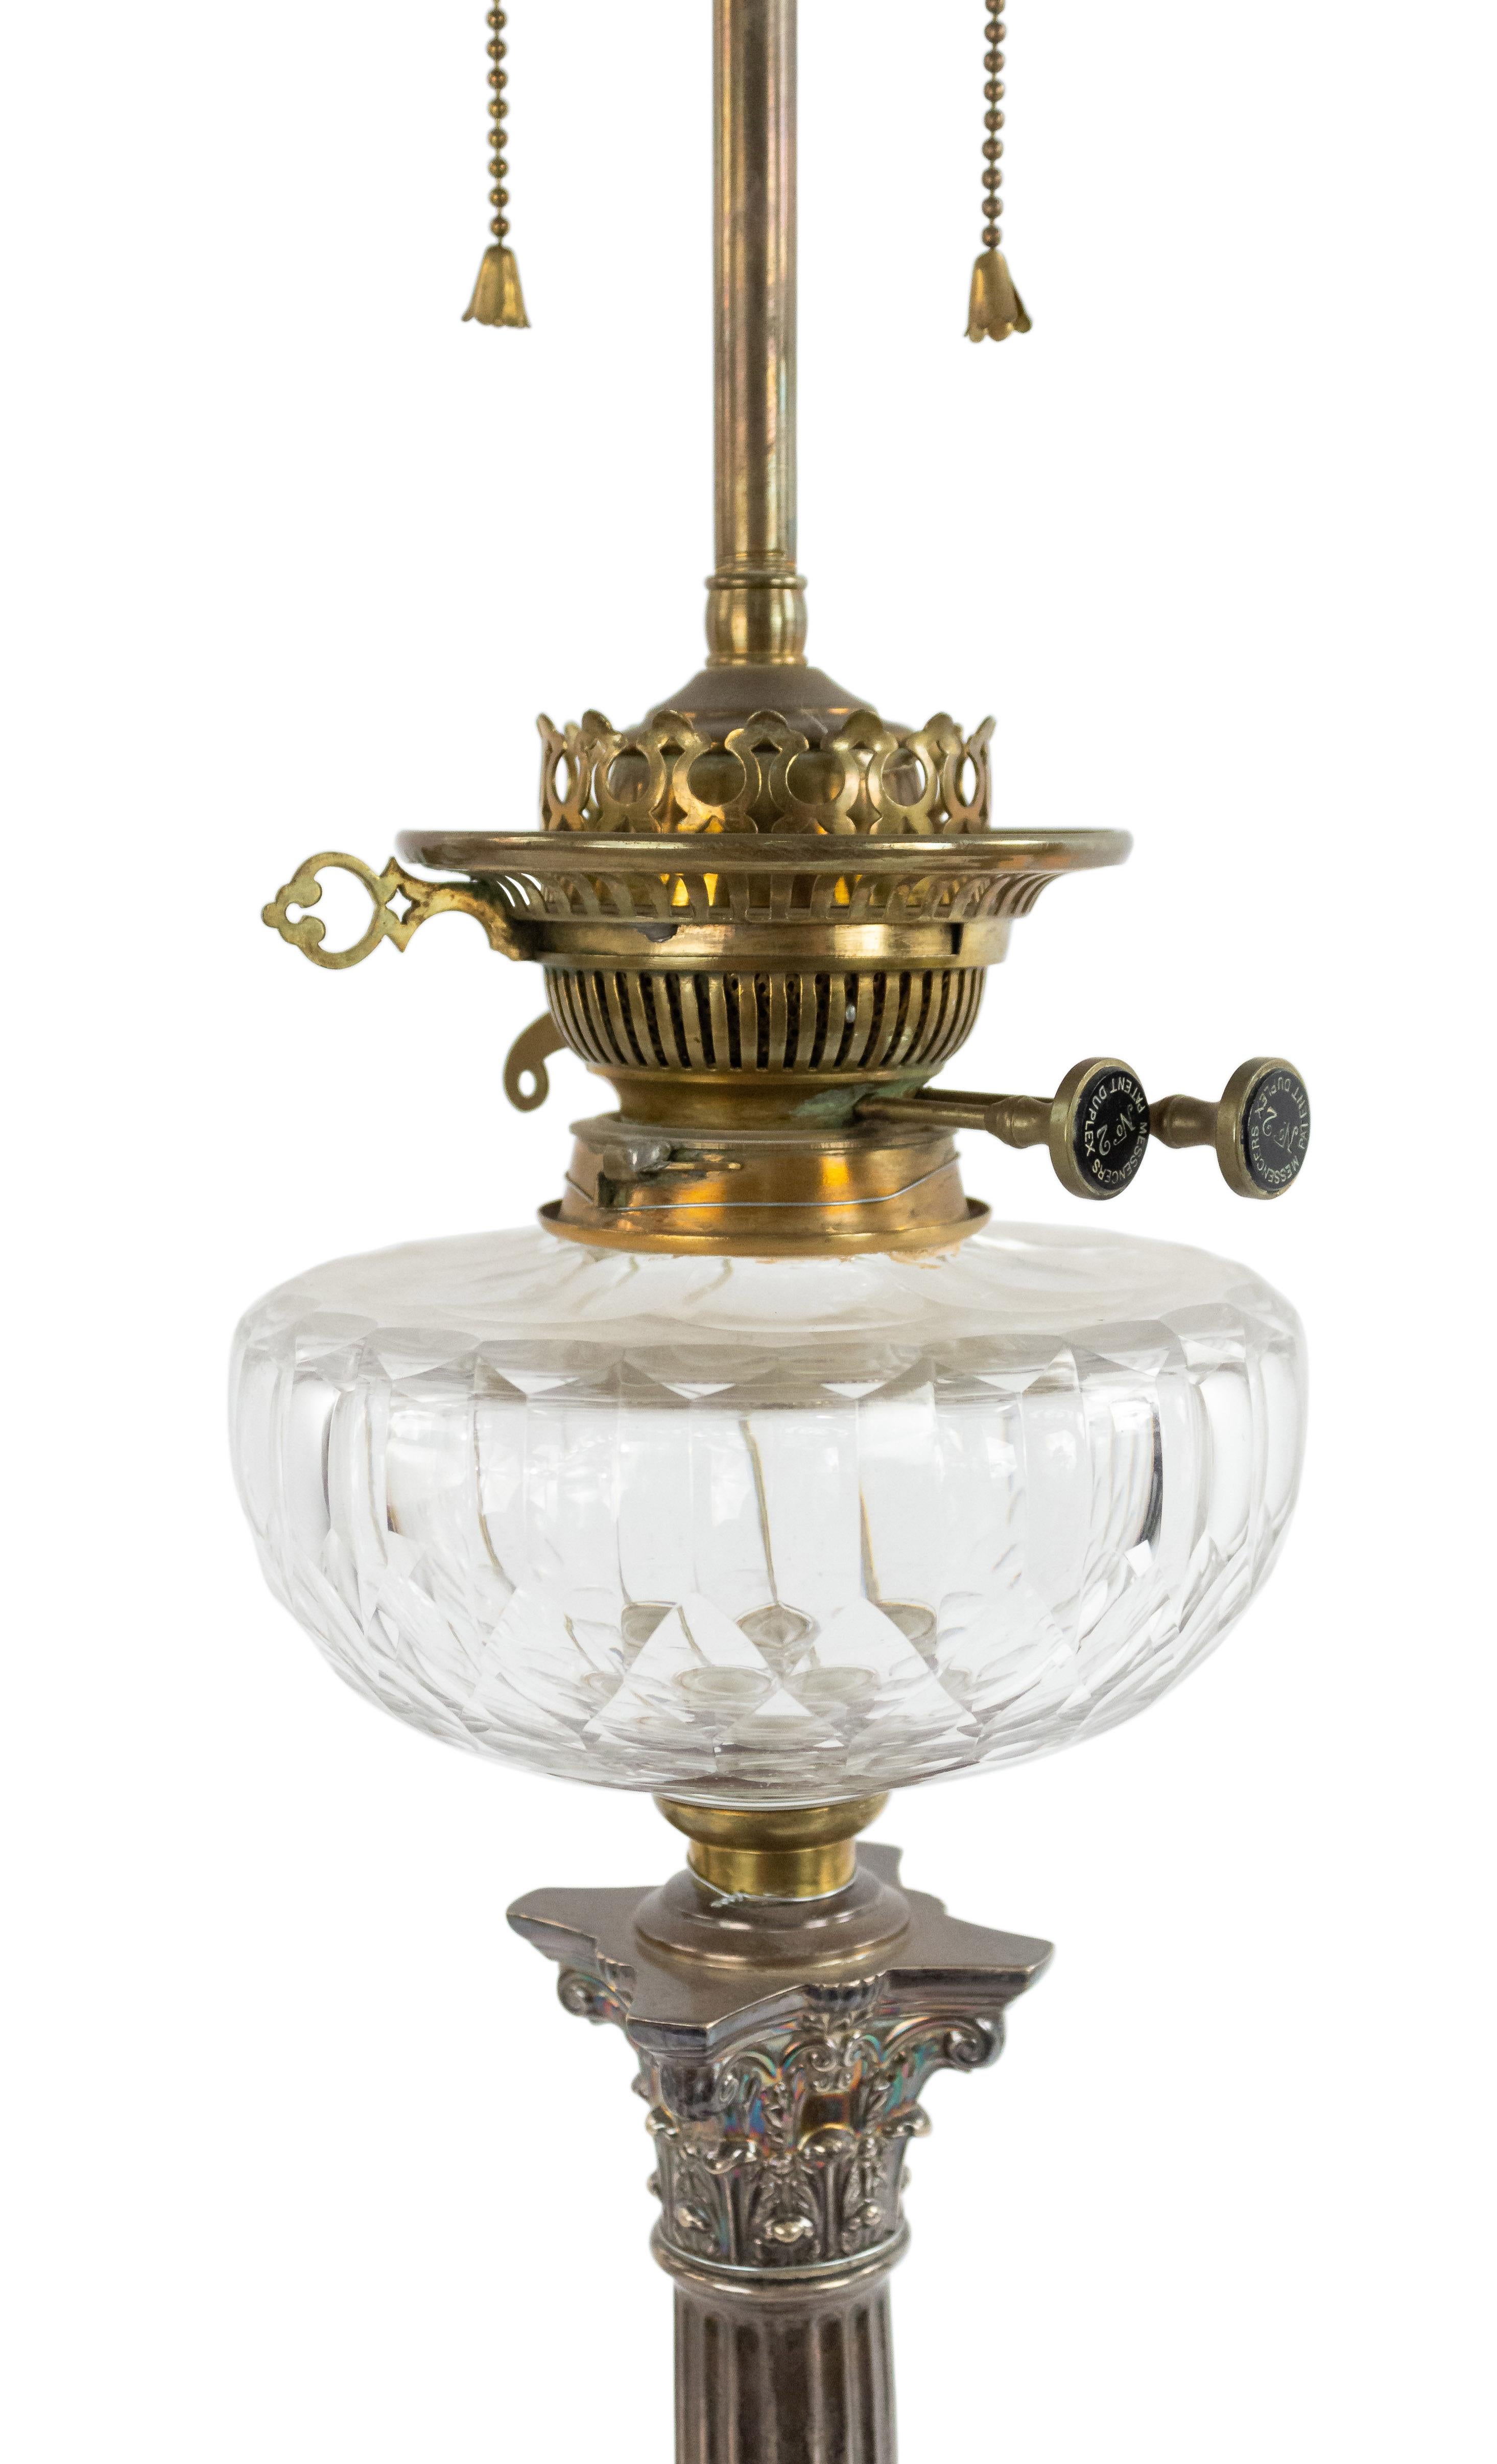 English Adam style (19th Century) silver plate Corinthian column table lamp with crystal font.
